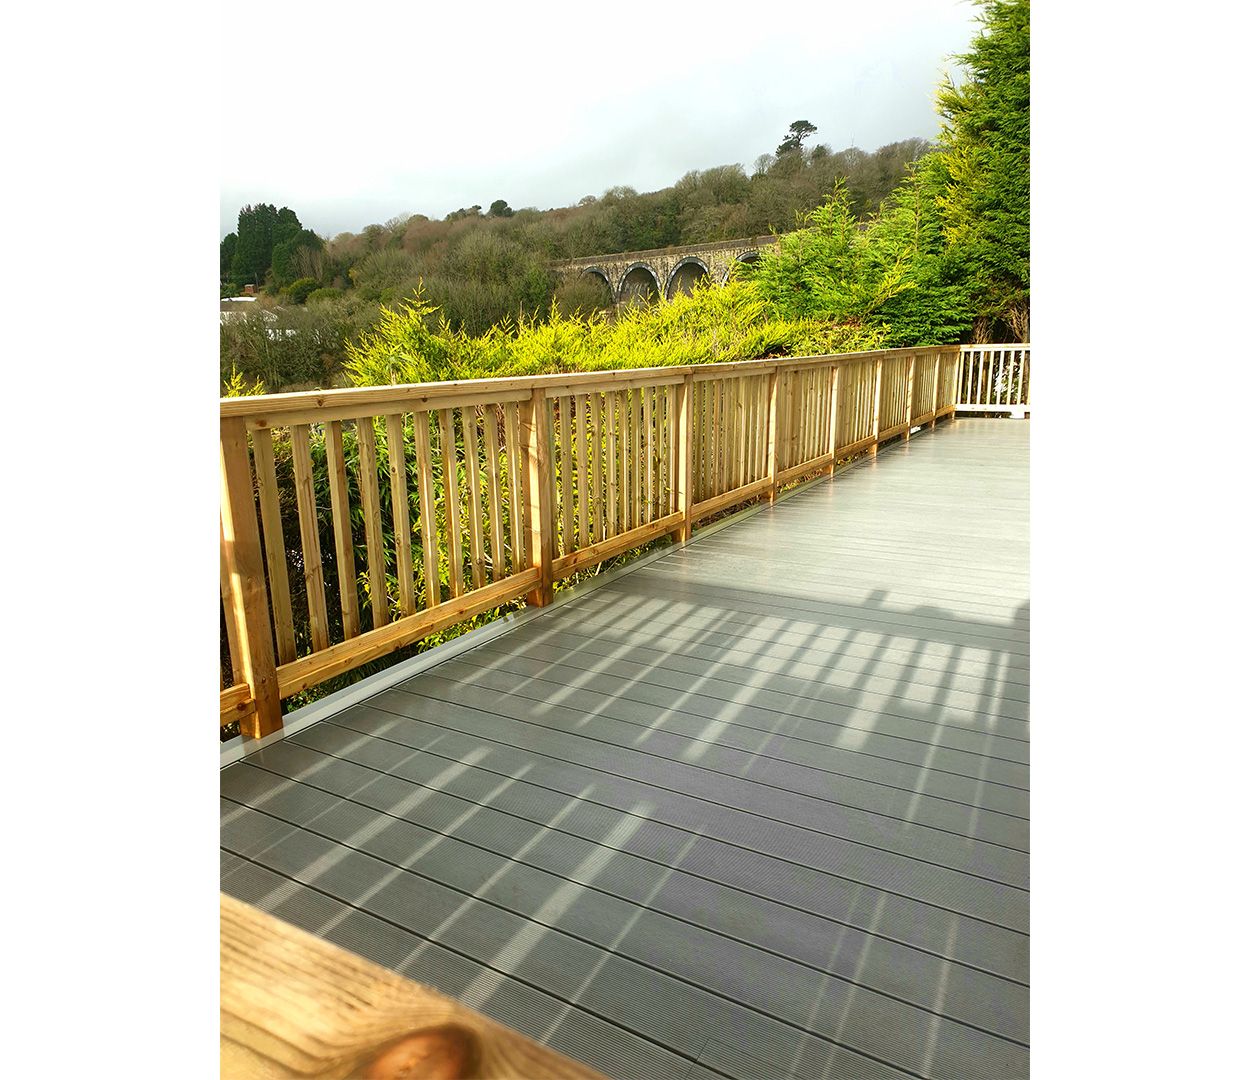 Cladco Composite Decking in Stone Grey installed by Gull Rock Company